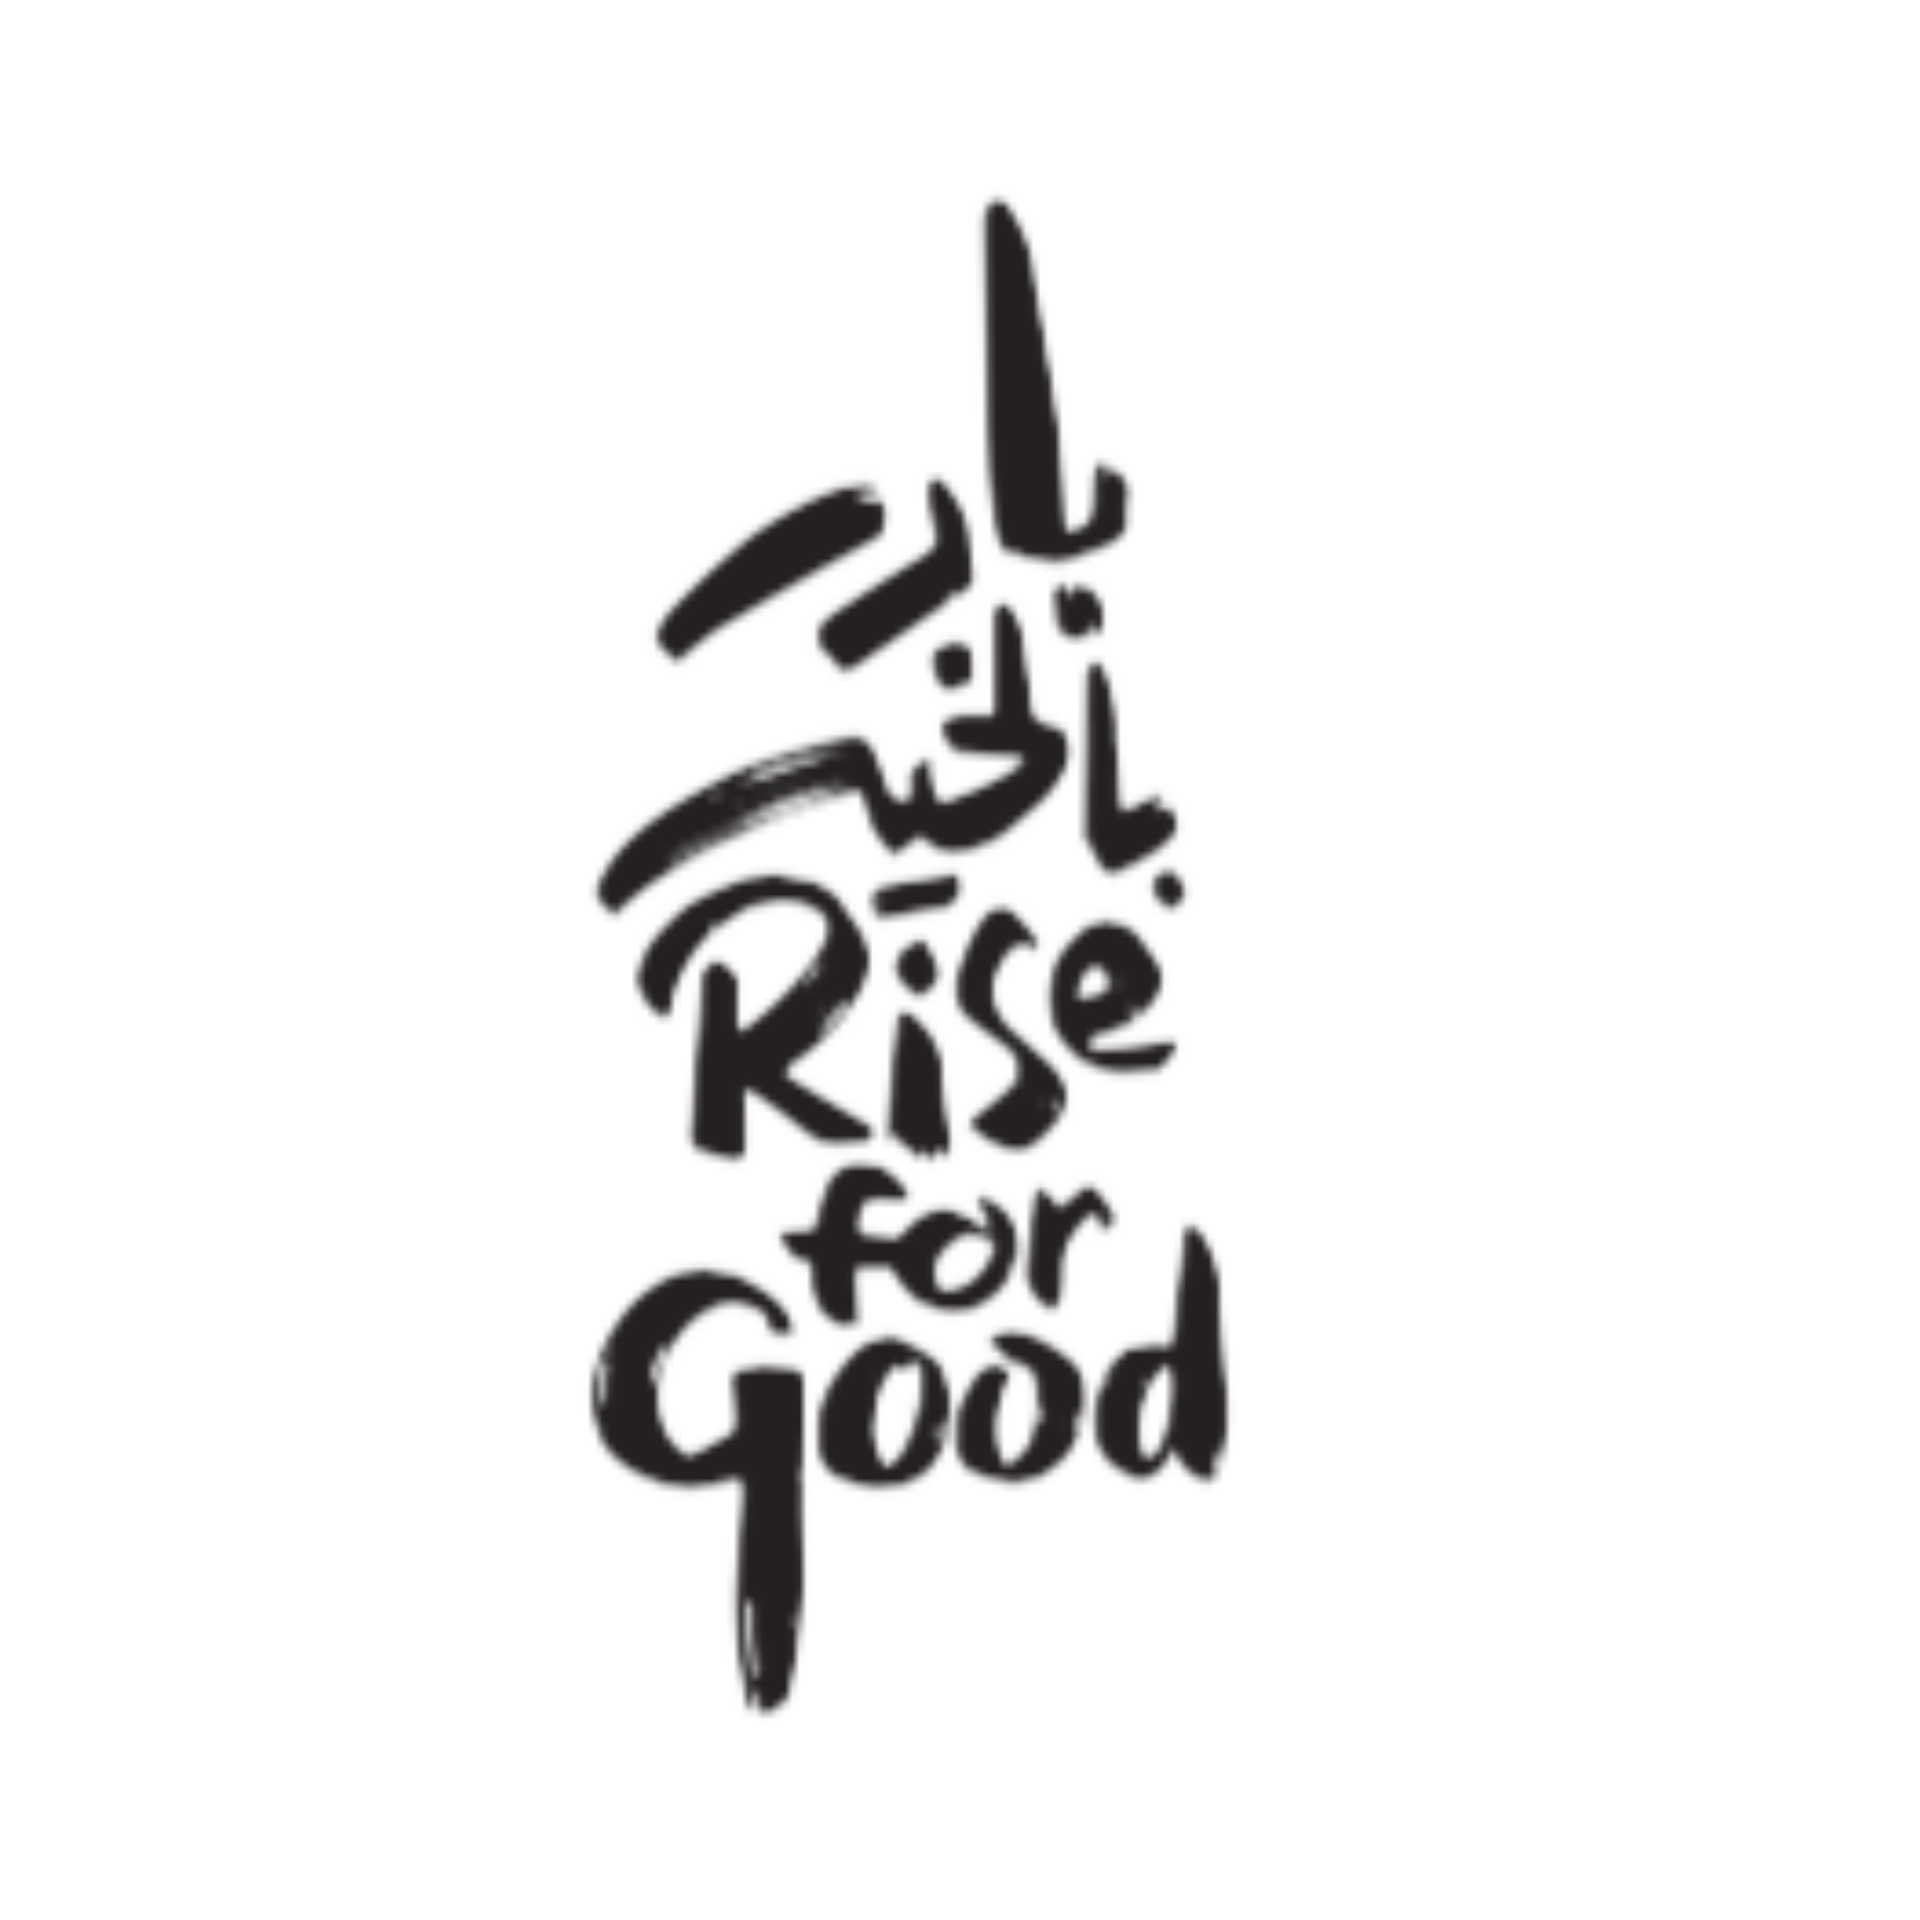 Rise For Good logo.png